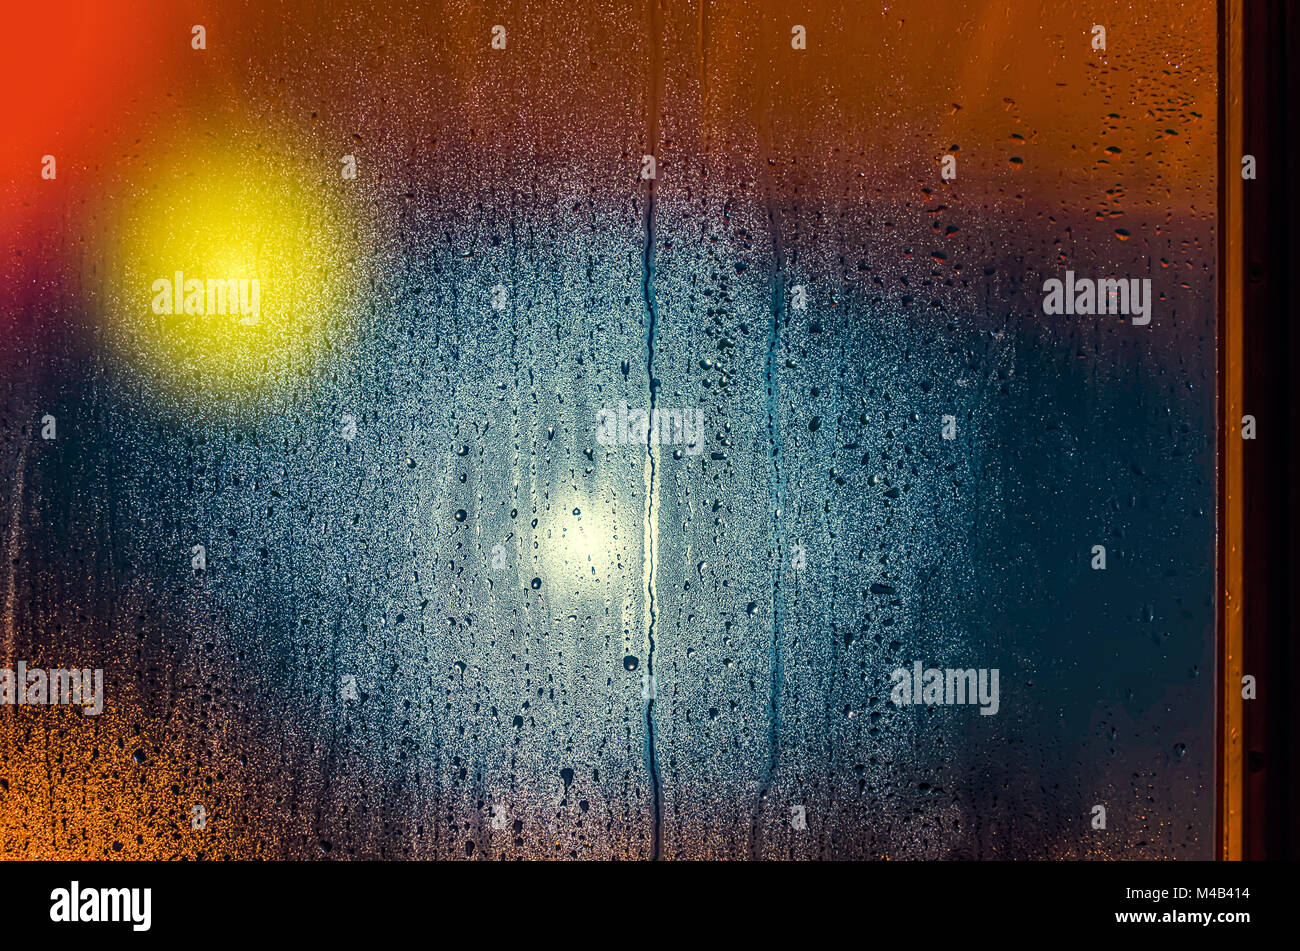 Drops and water spots on the glass on a rainy evening, multicolored spots and lights shining Stock Photo